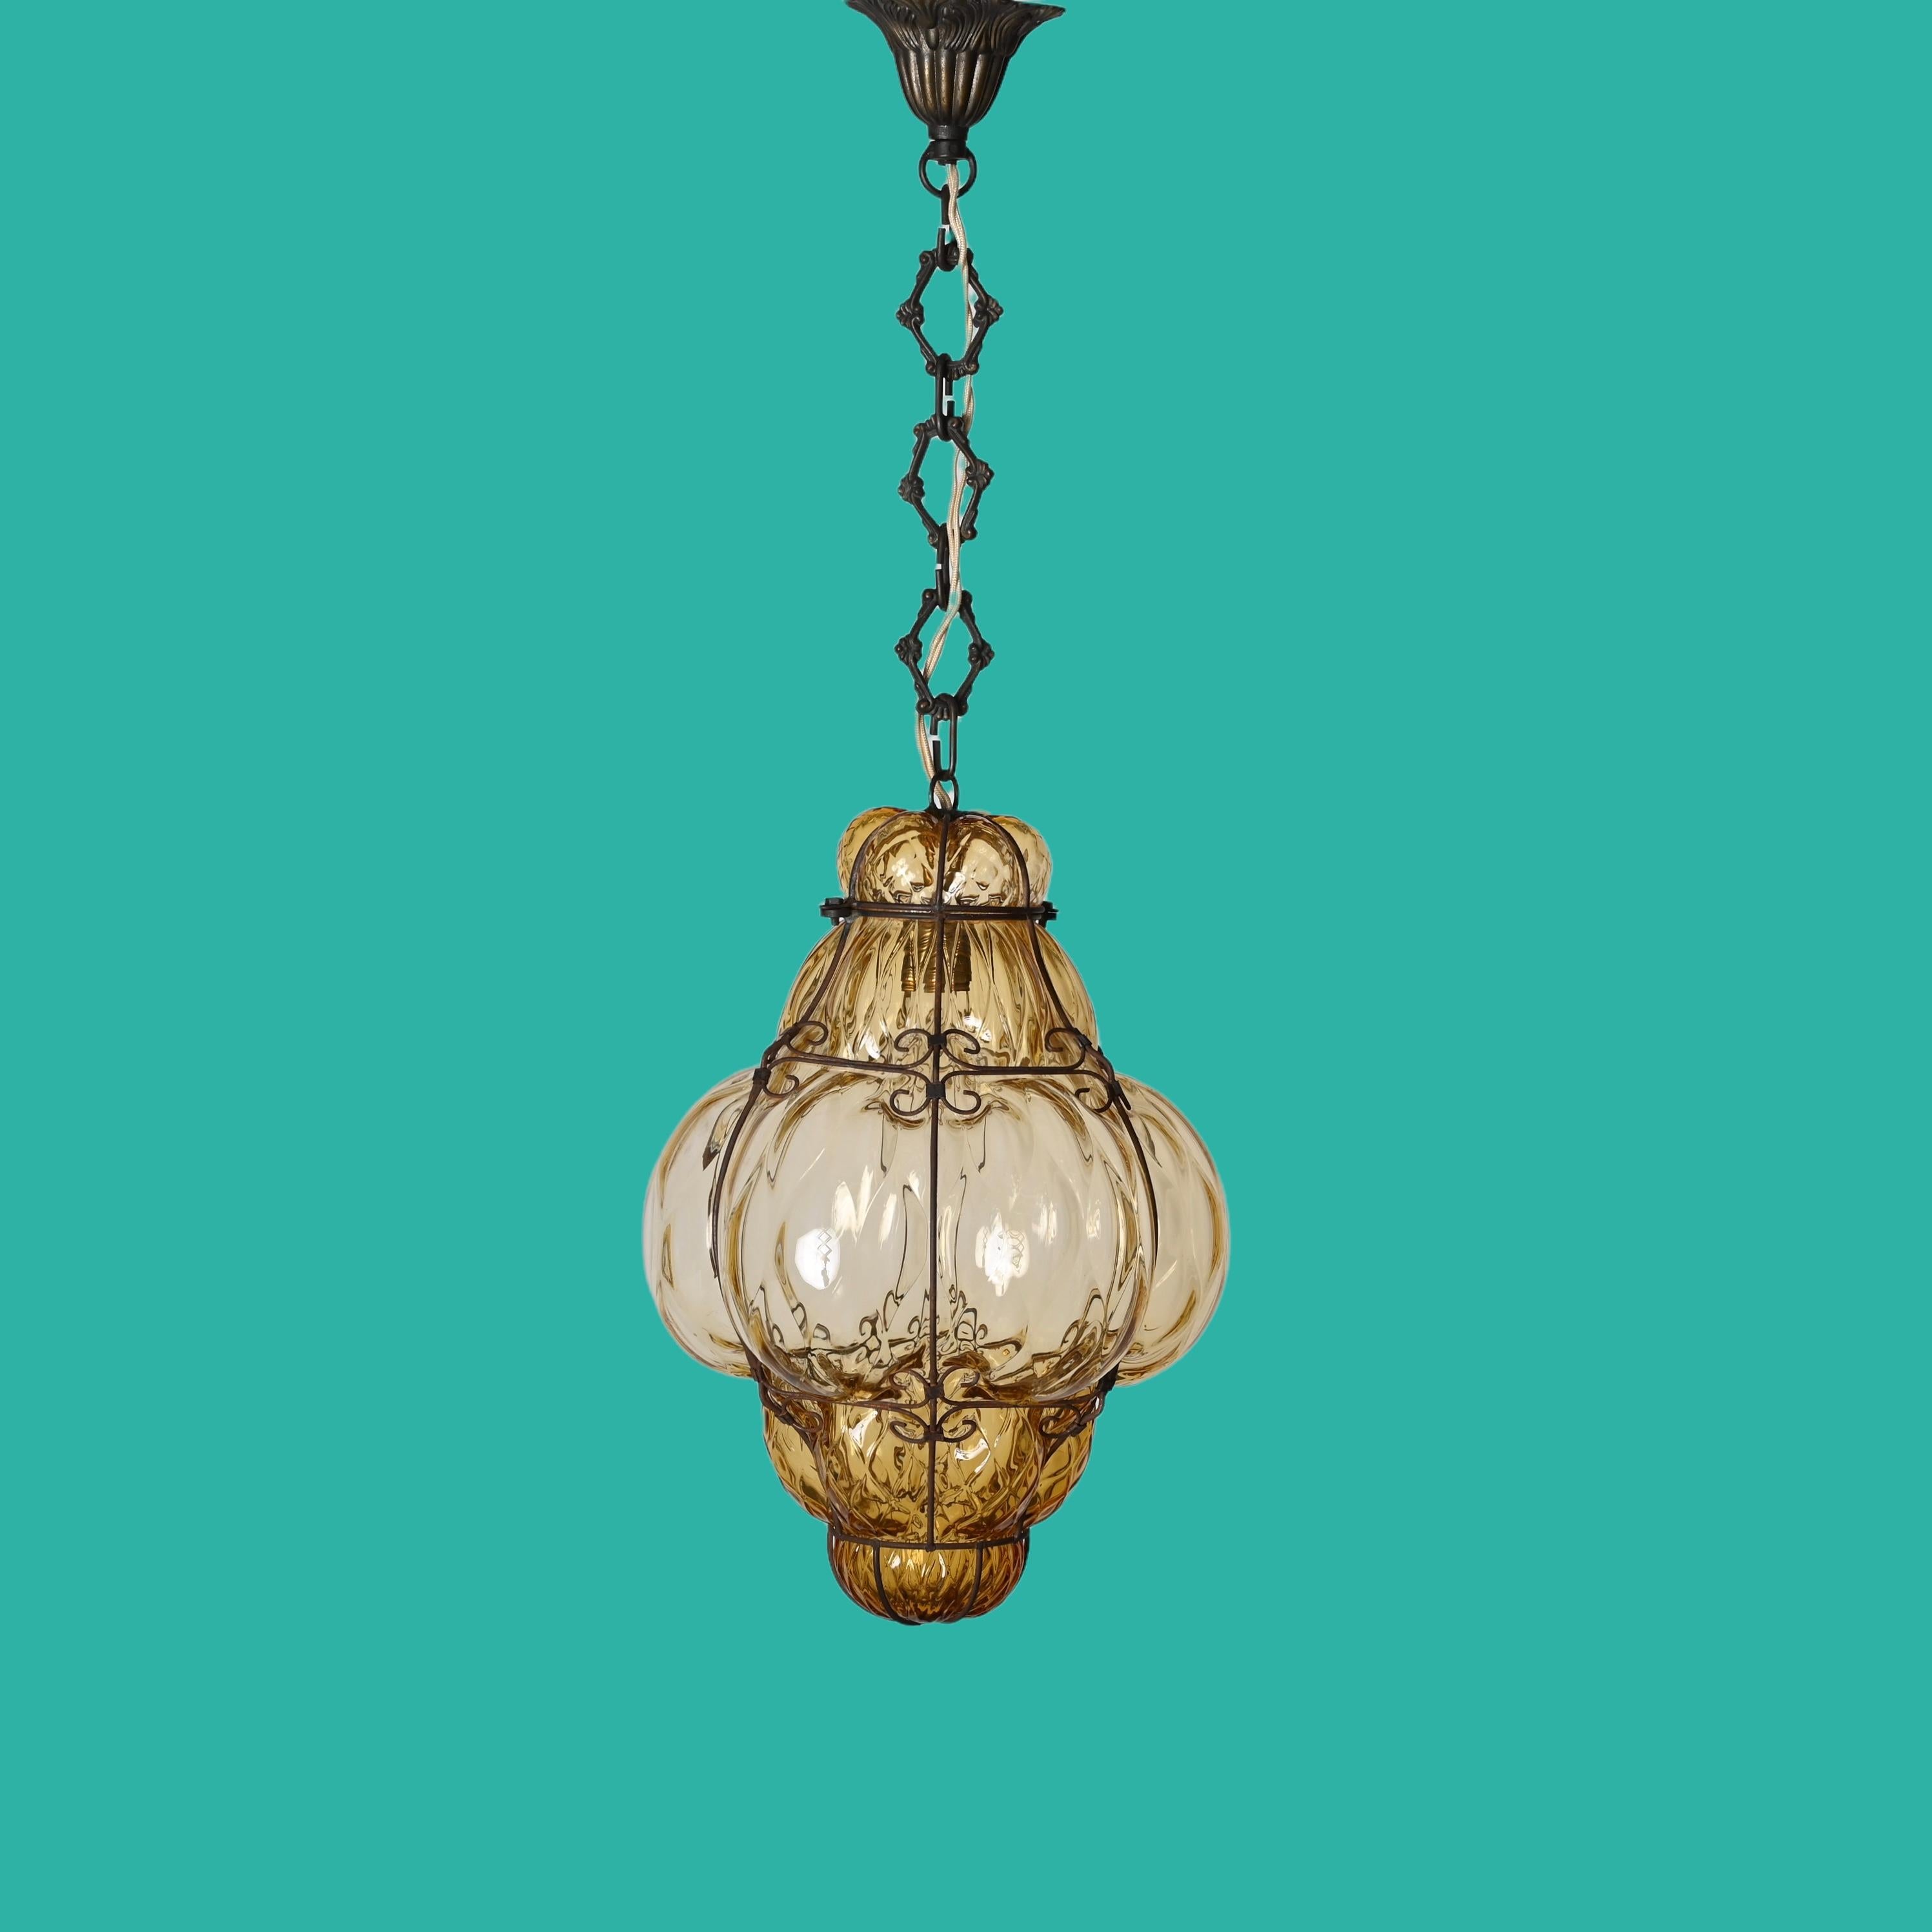 Beautiful large bubble chandelier in Murano glass with amber glass and iron cage. Giorgio Seguso created this glass is mouth-blown with an amber shade during the 1940s in Italy.

This Murano glass bubble cage pendant has an oriental style and